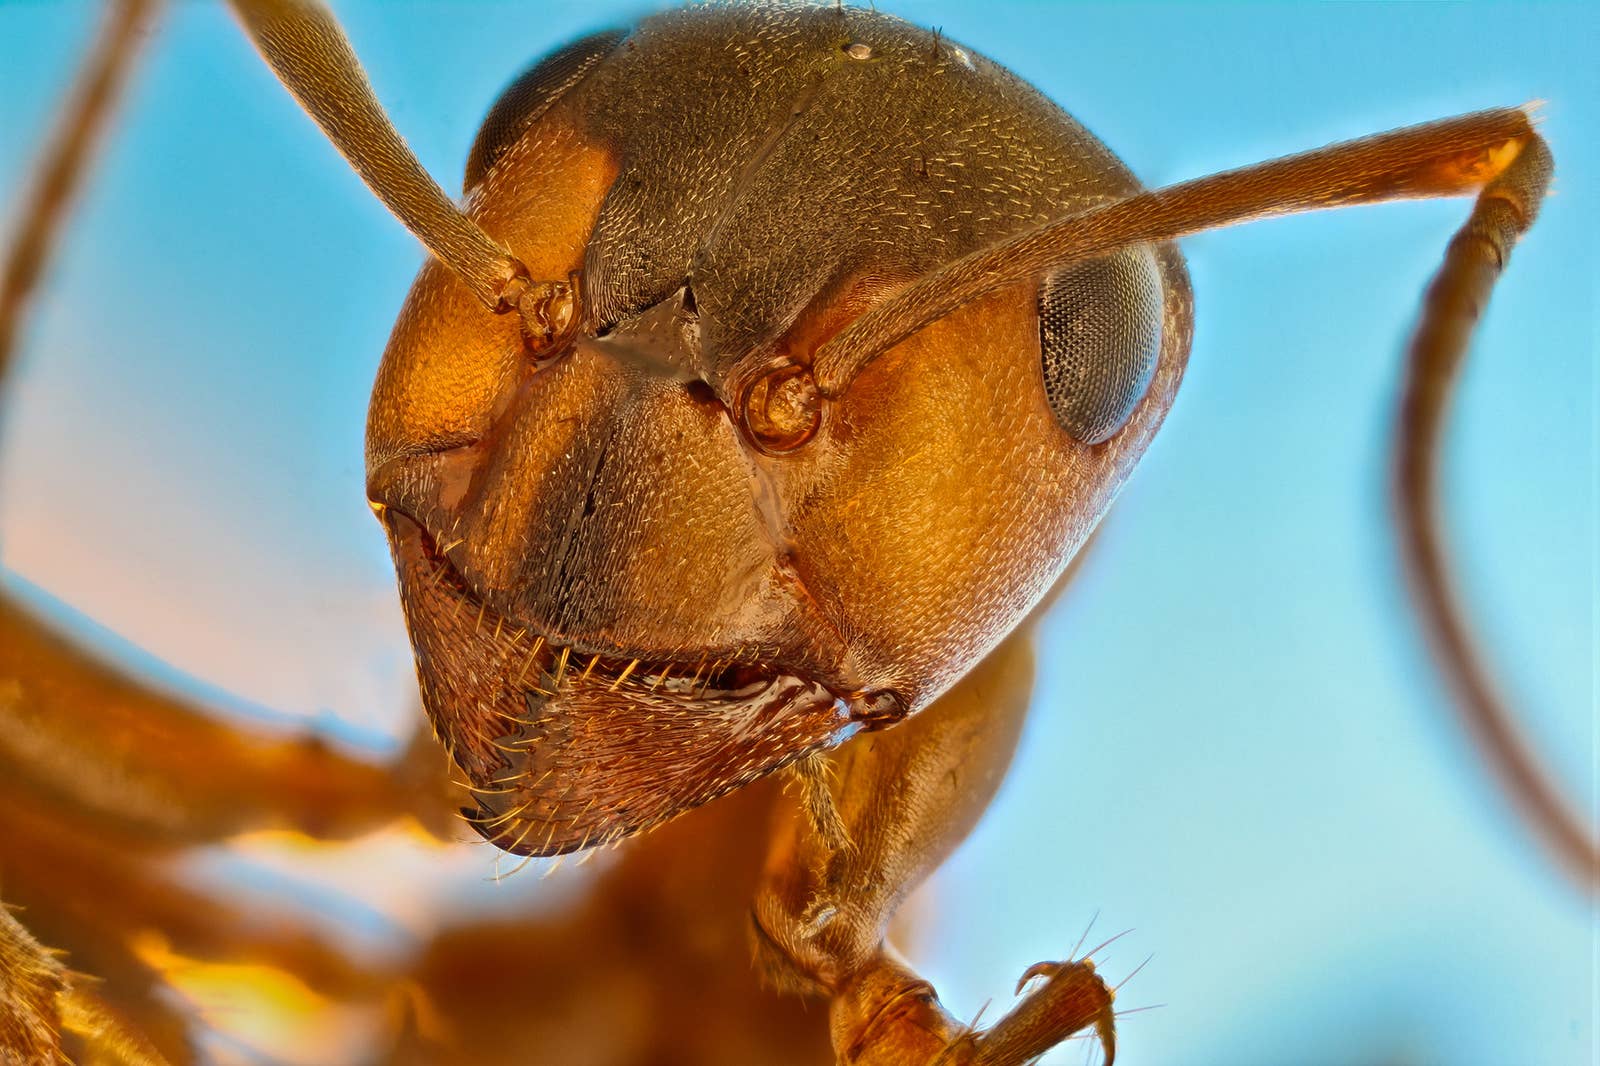 A close-up of an ant looming over the camera with a blue background